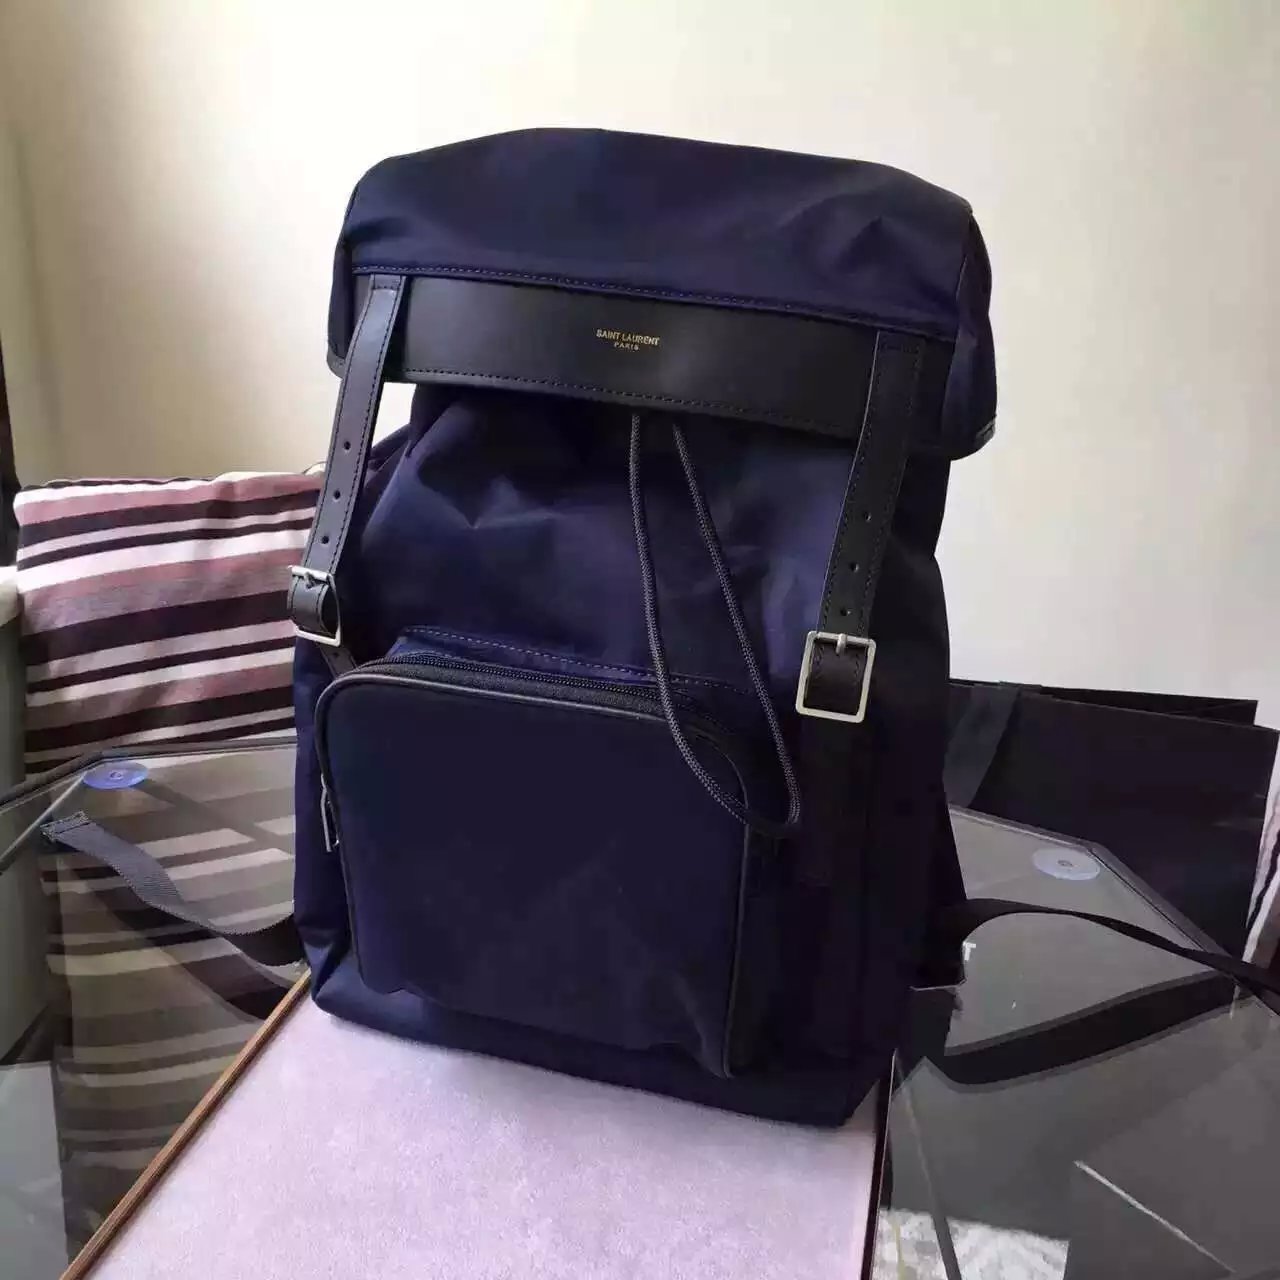 Limited Edition!2016 New Saint Laurent Bag Cheap Sale-Saint Laurent Hunting Rucksack in Royal Blue Canvas and Black Leather